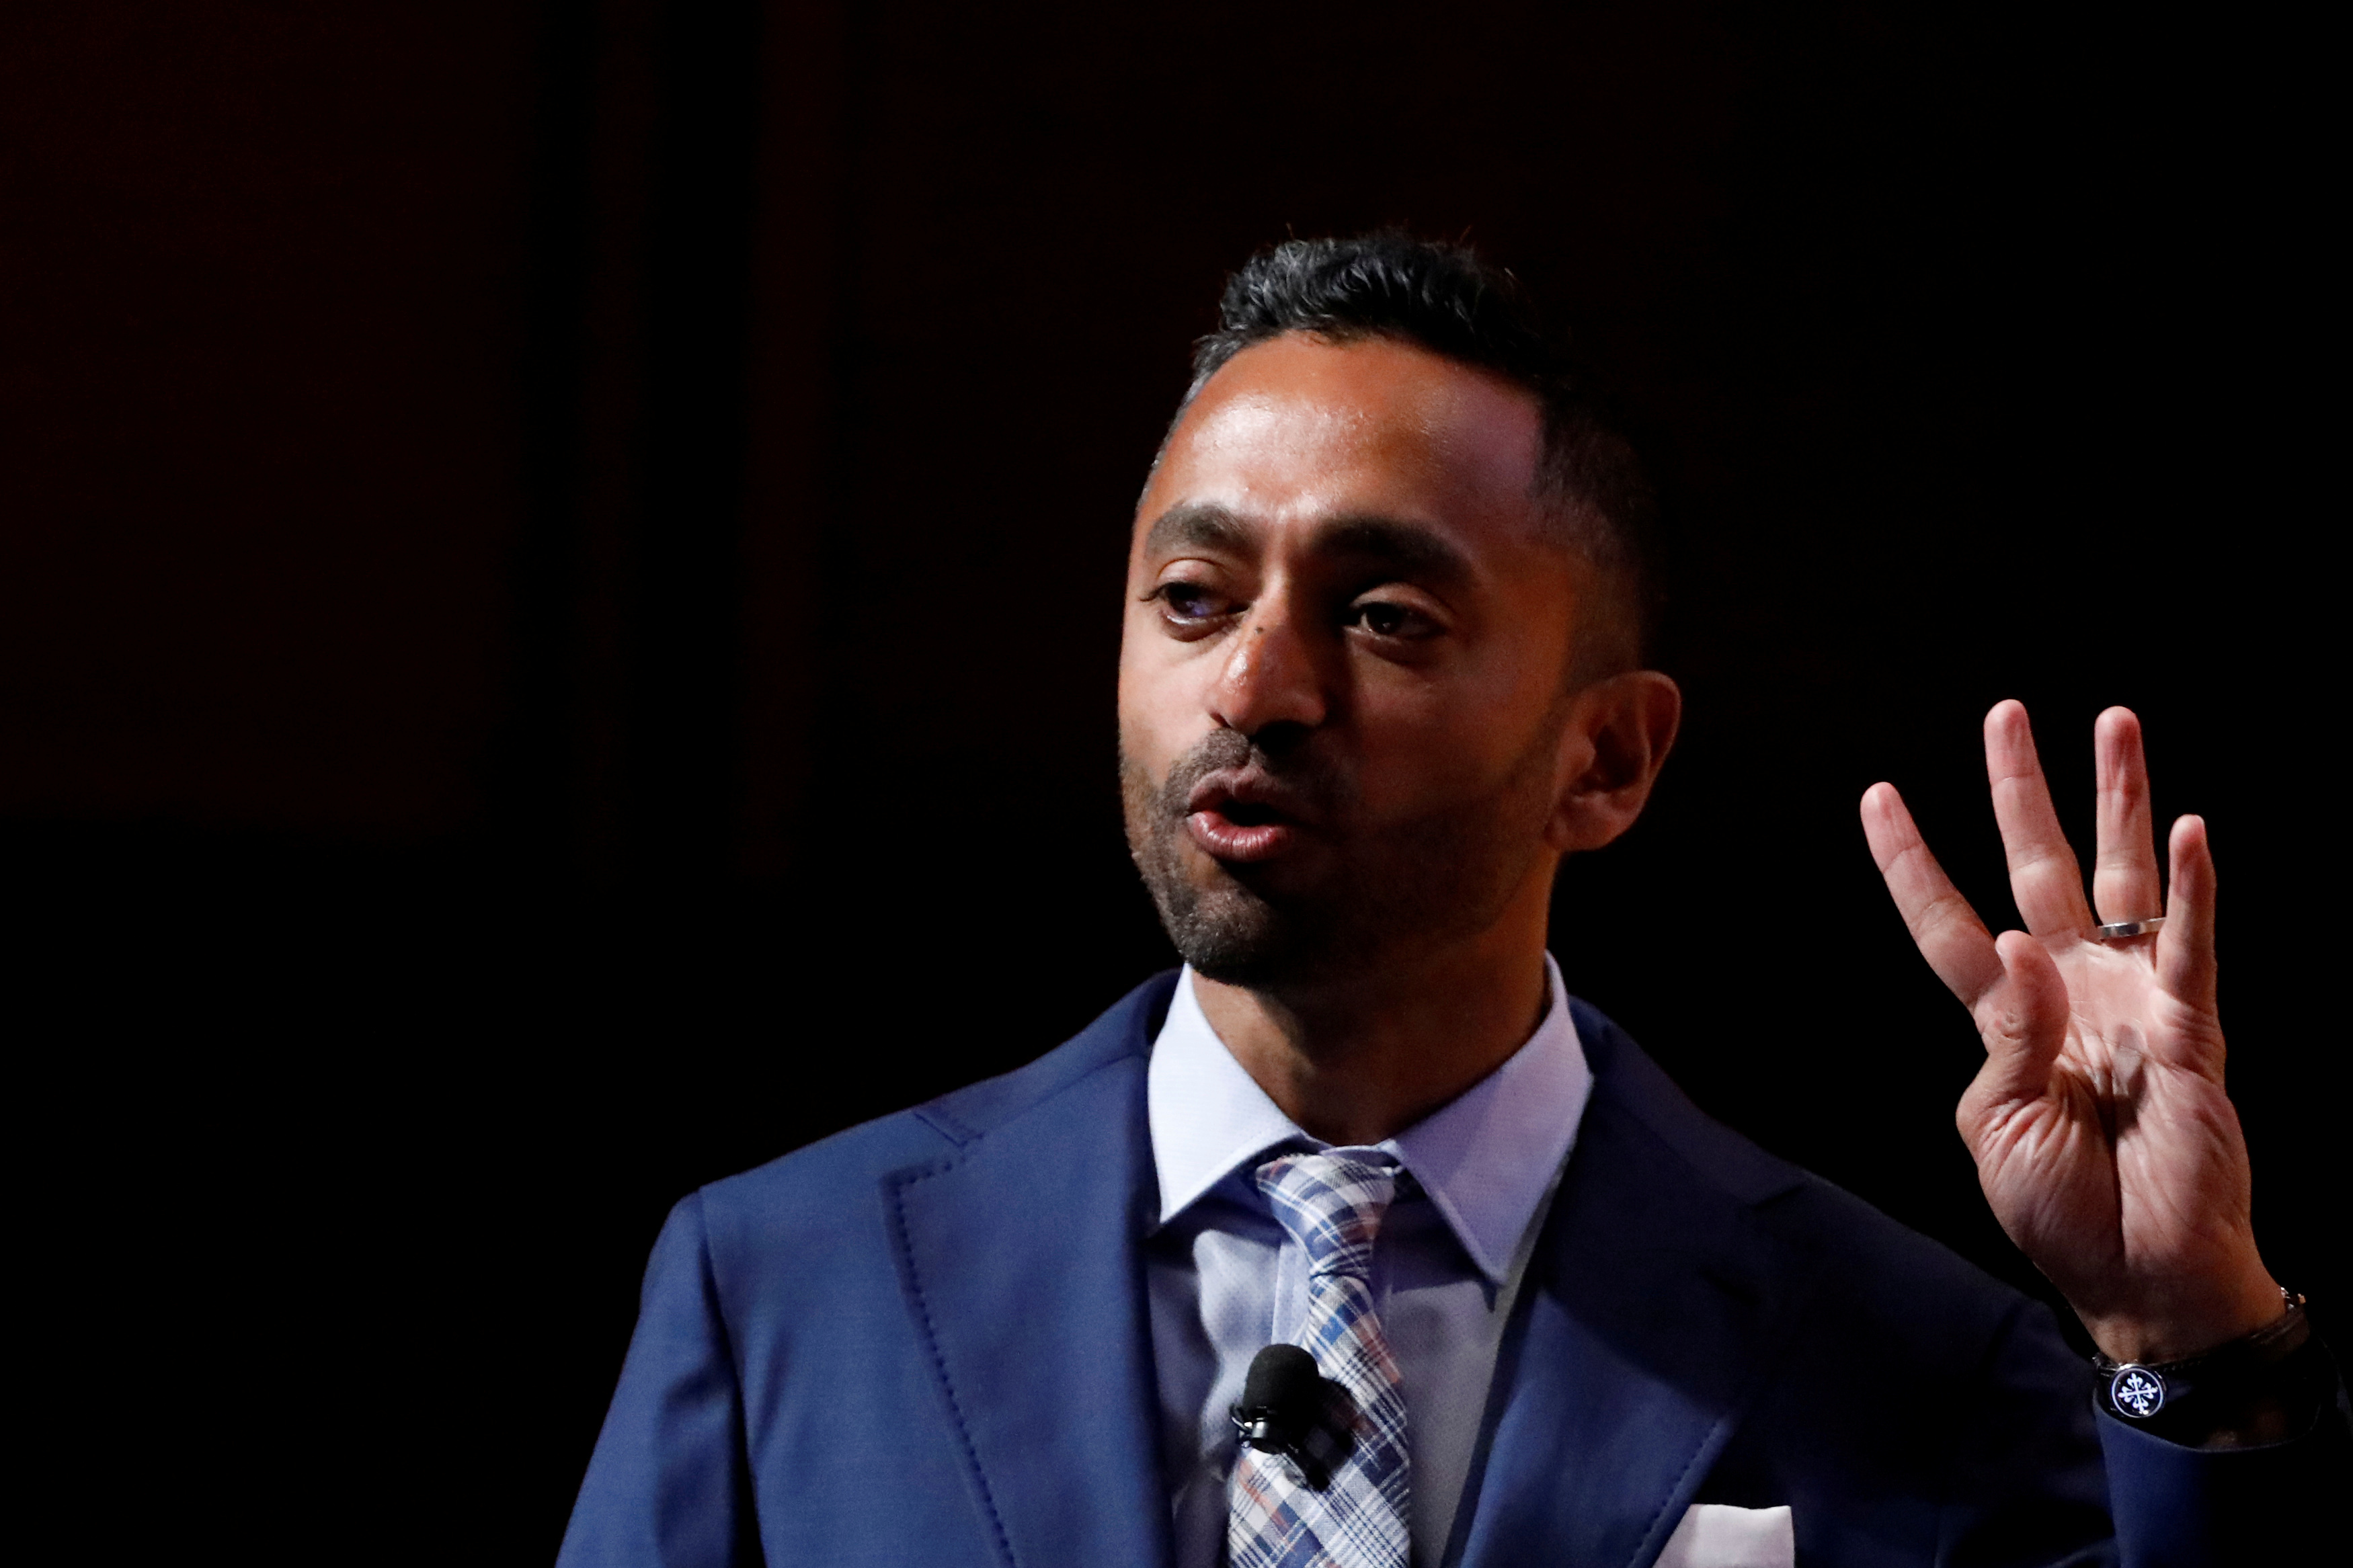 Chamath Palihapitiya, founder and CEO of Social Capital, at a conference in 2017